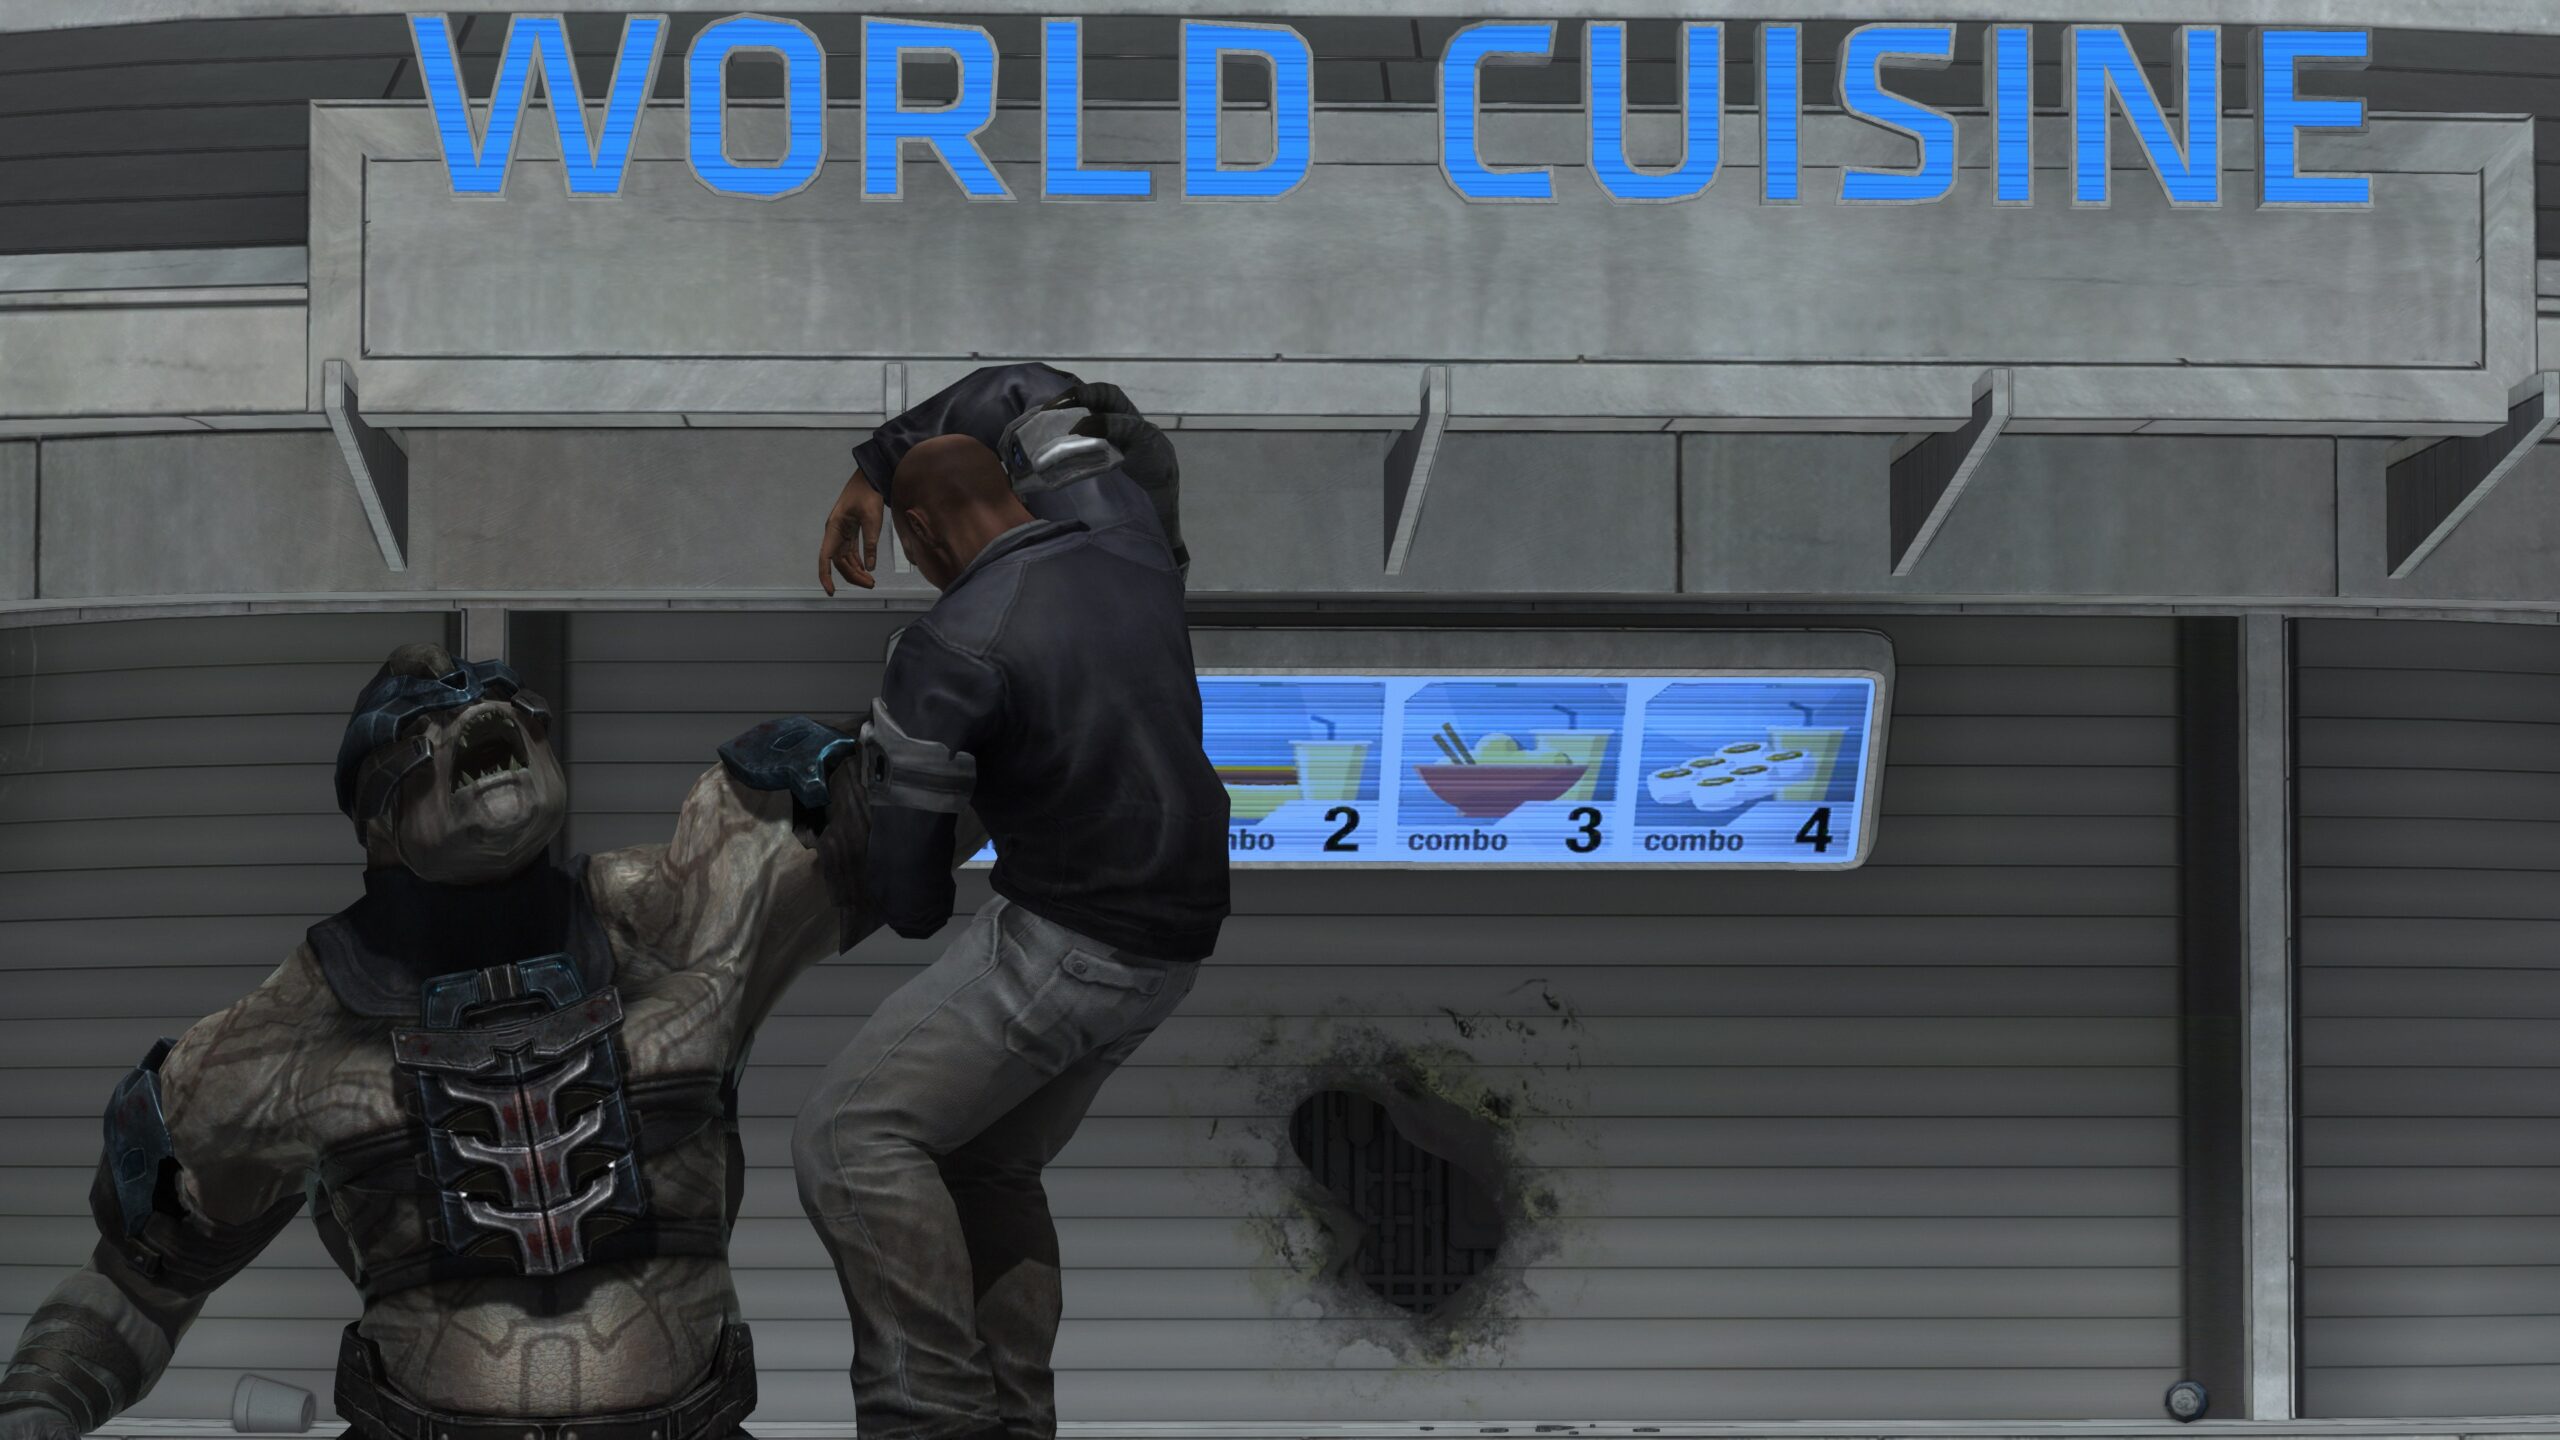 In-game screenshot of Halo: Reach mission Exodus where a Brute holds a human aloft in front of the World Cuisine cafe